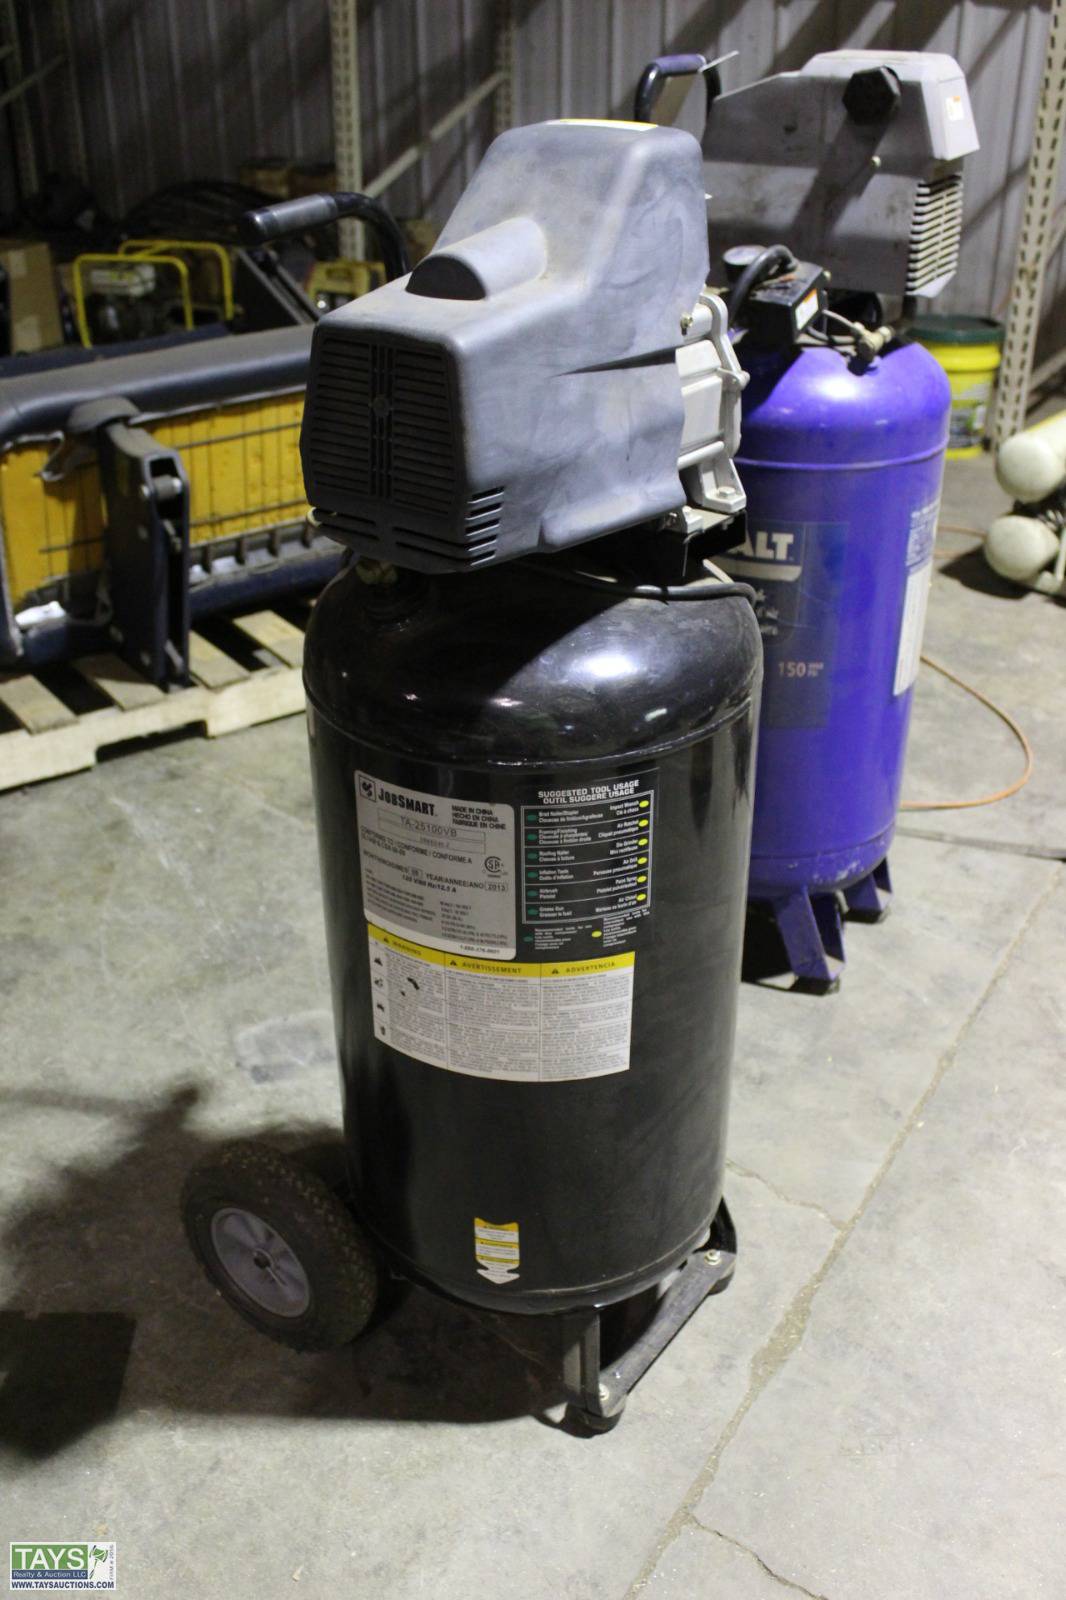 Tays Realty & Auction - Auction: ONLINE ABSOLUTE AUCTION: UPPER CUMBERLAND  RENTAL & SALES BUSINESS LIQUIDATION ITEM: Job Smart Air Compressor